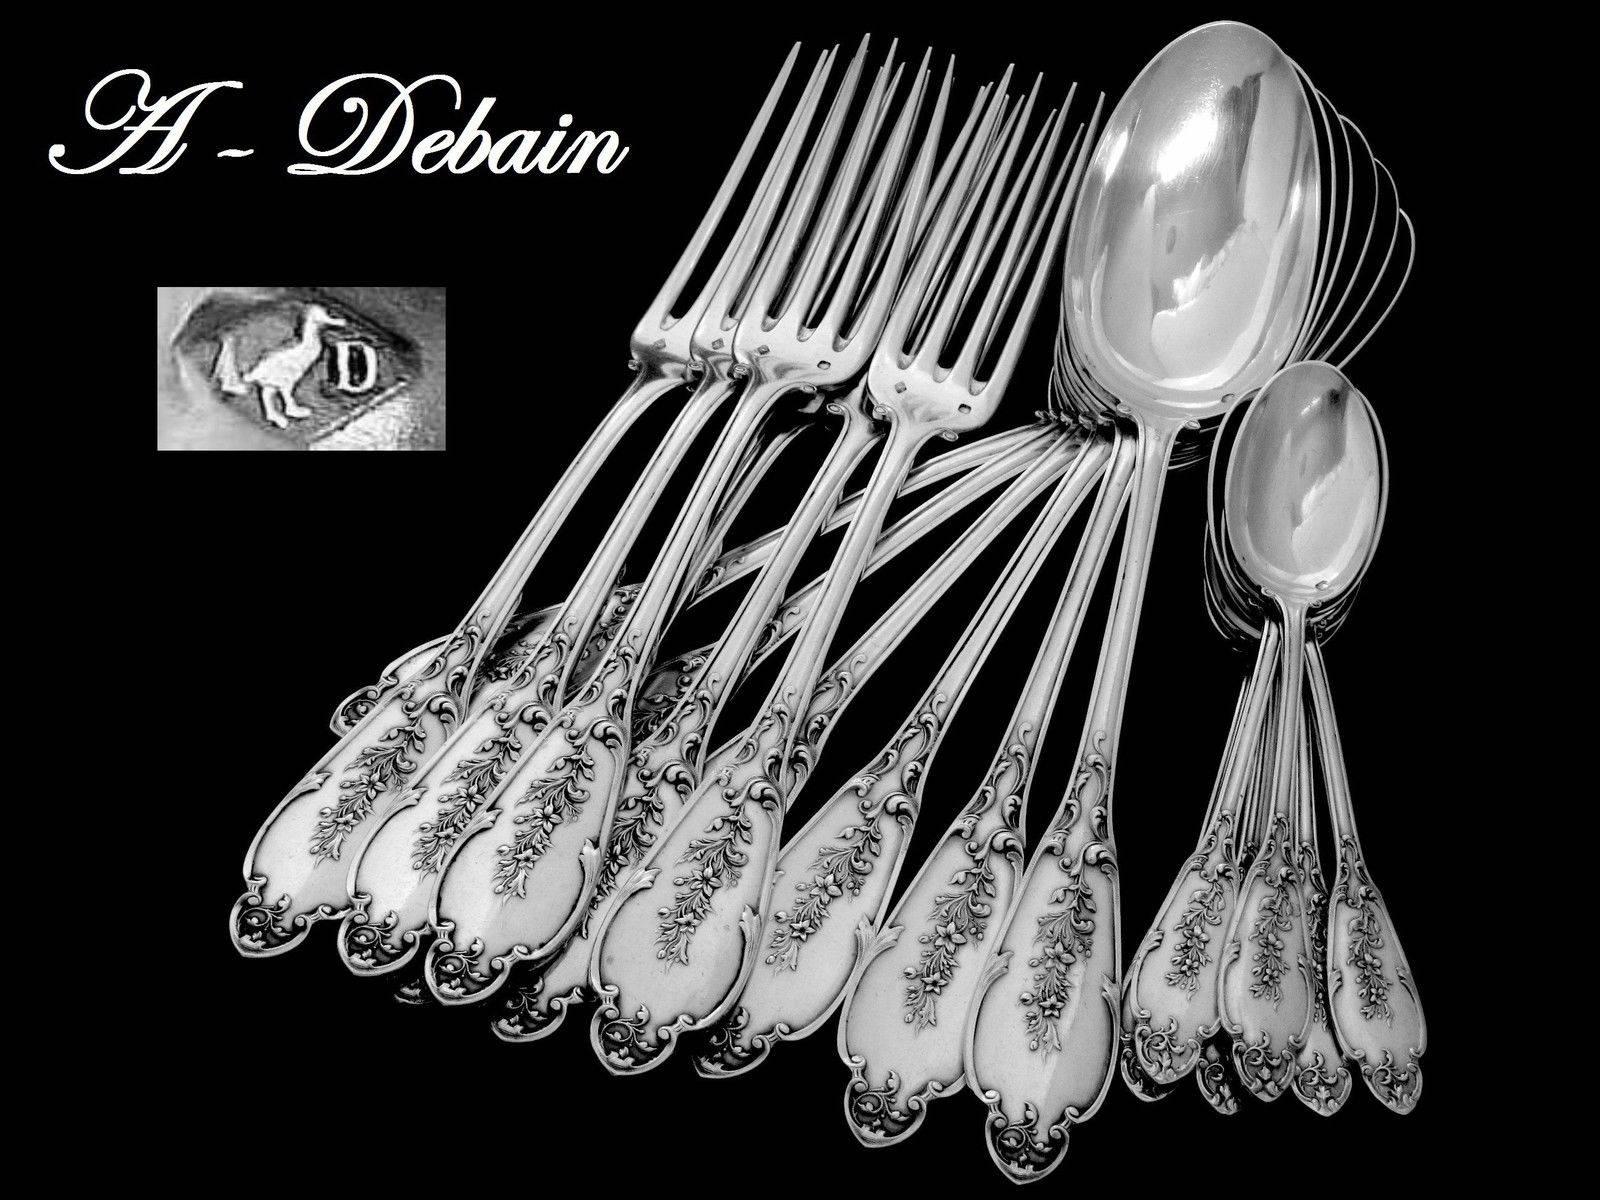 Forks, spoons and tea spoons have Head of Minerve 1st titre for 950/1000 French sterling silver guarantee

This set consists of a four pieces place setting for six with: six sterling silver dinner forks, six sterling silver dinner spoons, six tea or